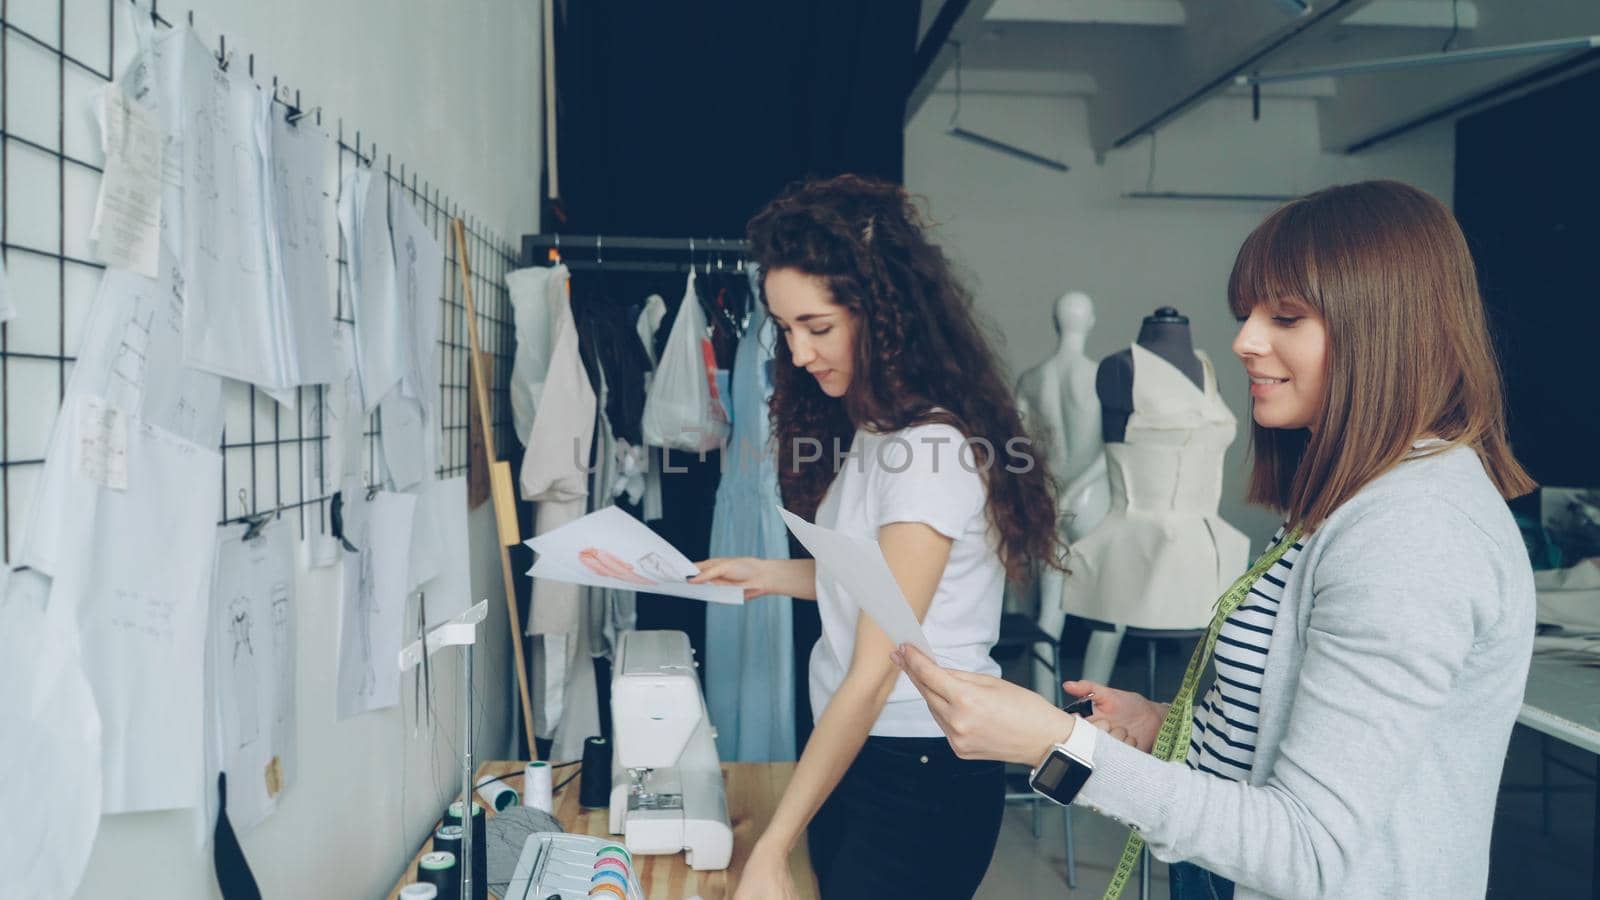 Attractive women clothing designers looking at garment sketches hanging on wall, discussing them, choosing new images for newest collection. Friendly informal atmosphere in studio.